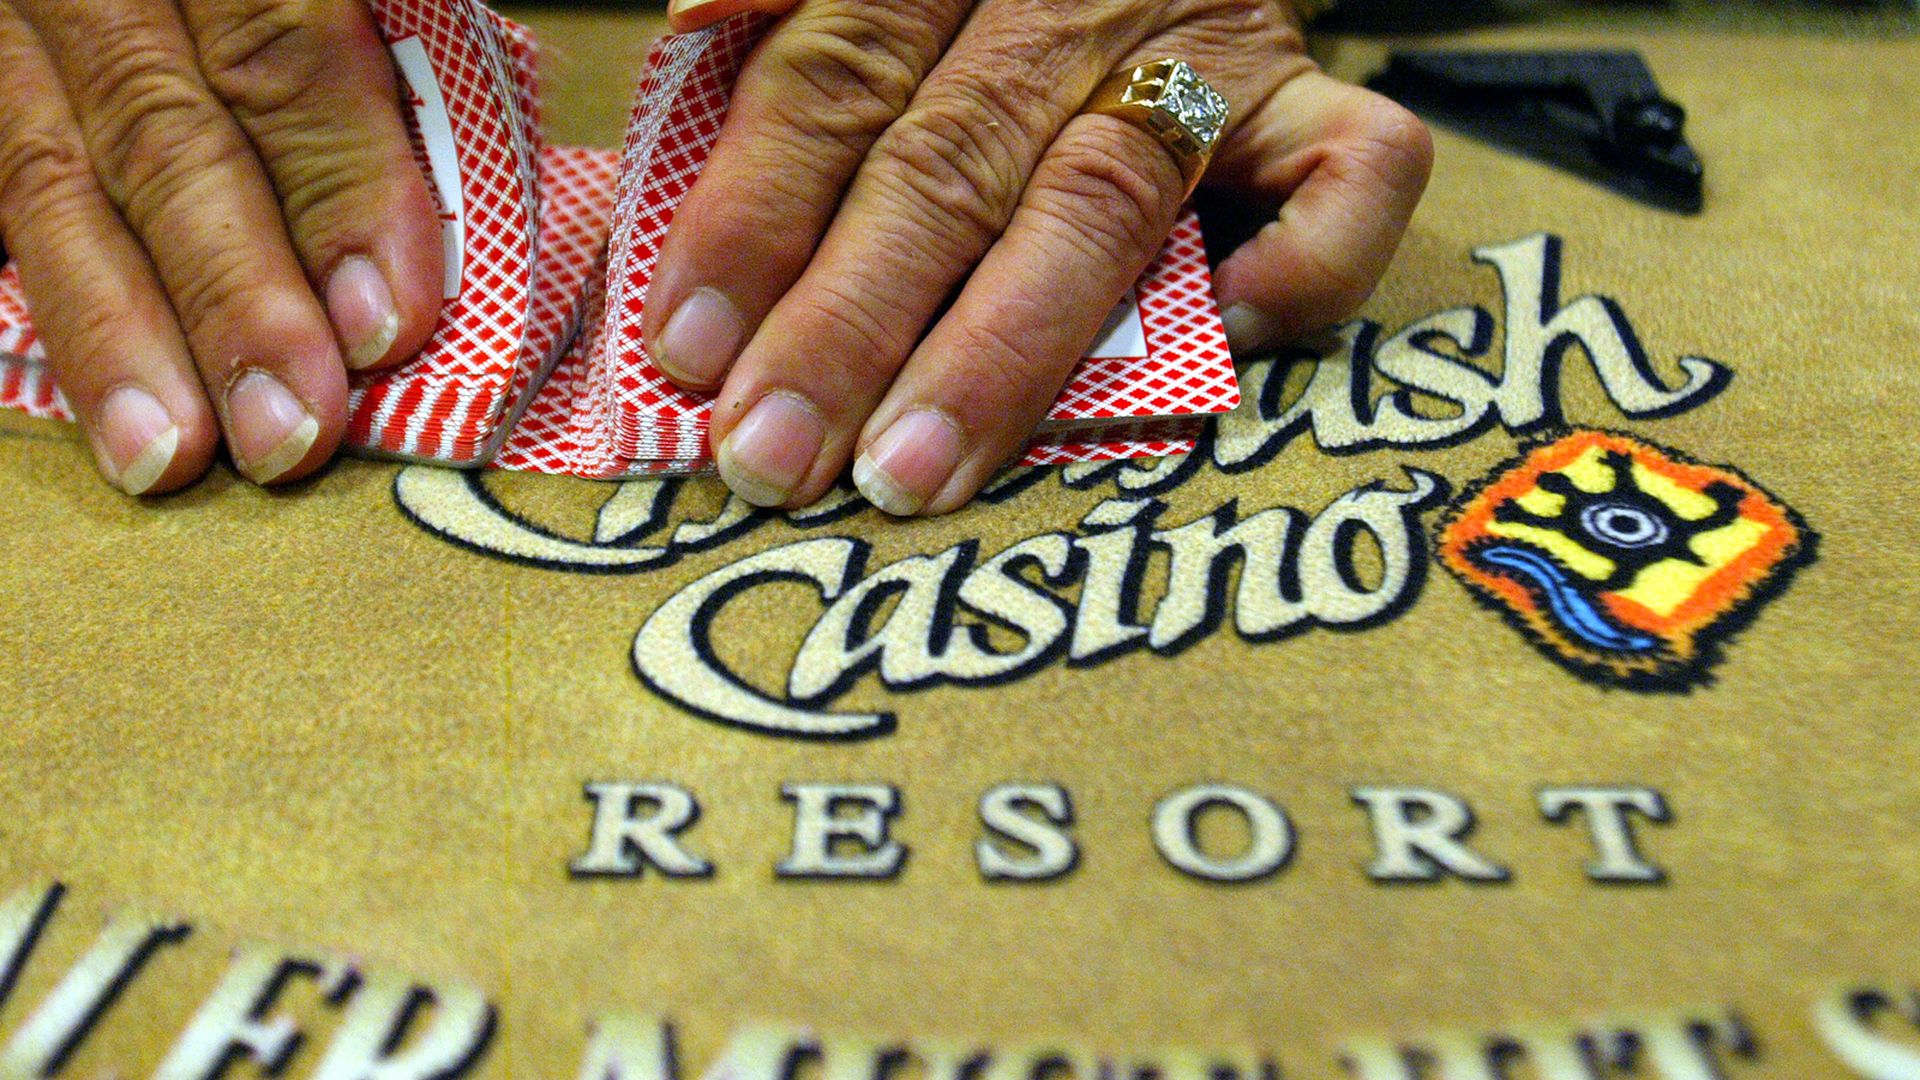 Photo of hands dealing cards on a table with the words "Casino Resort" embroidered in it